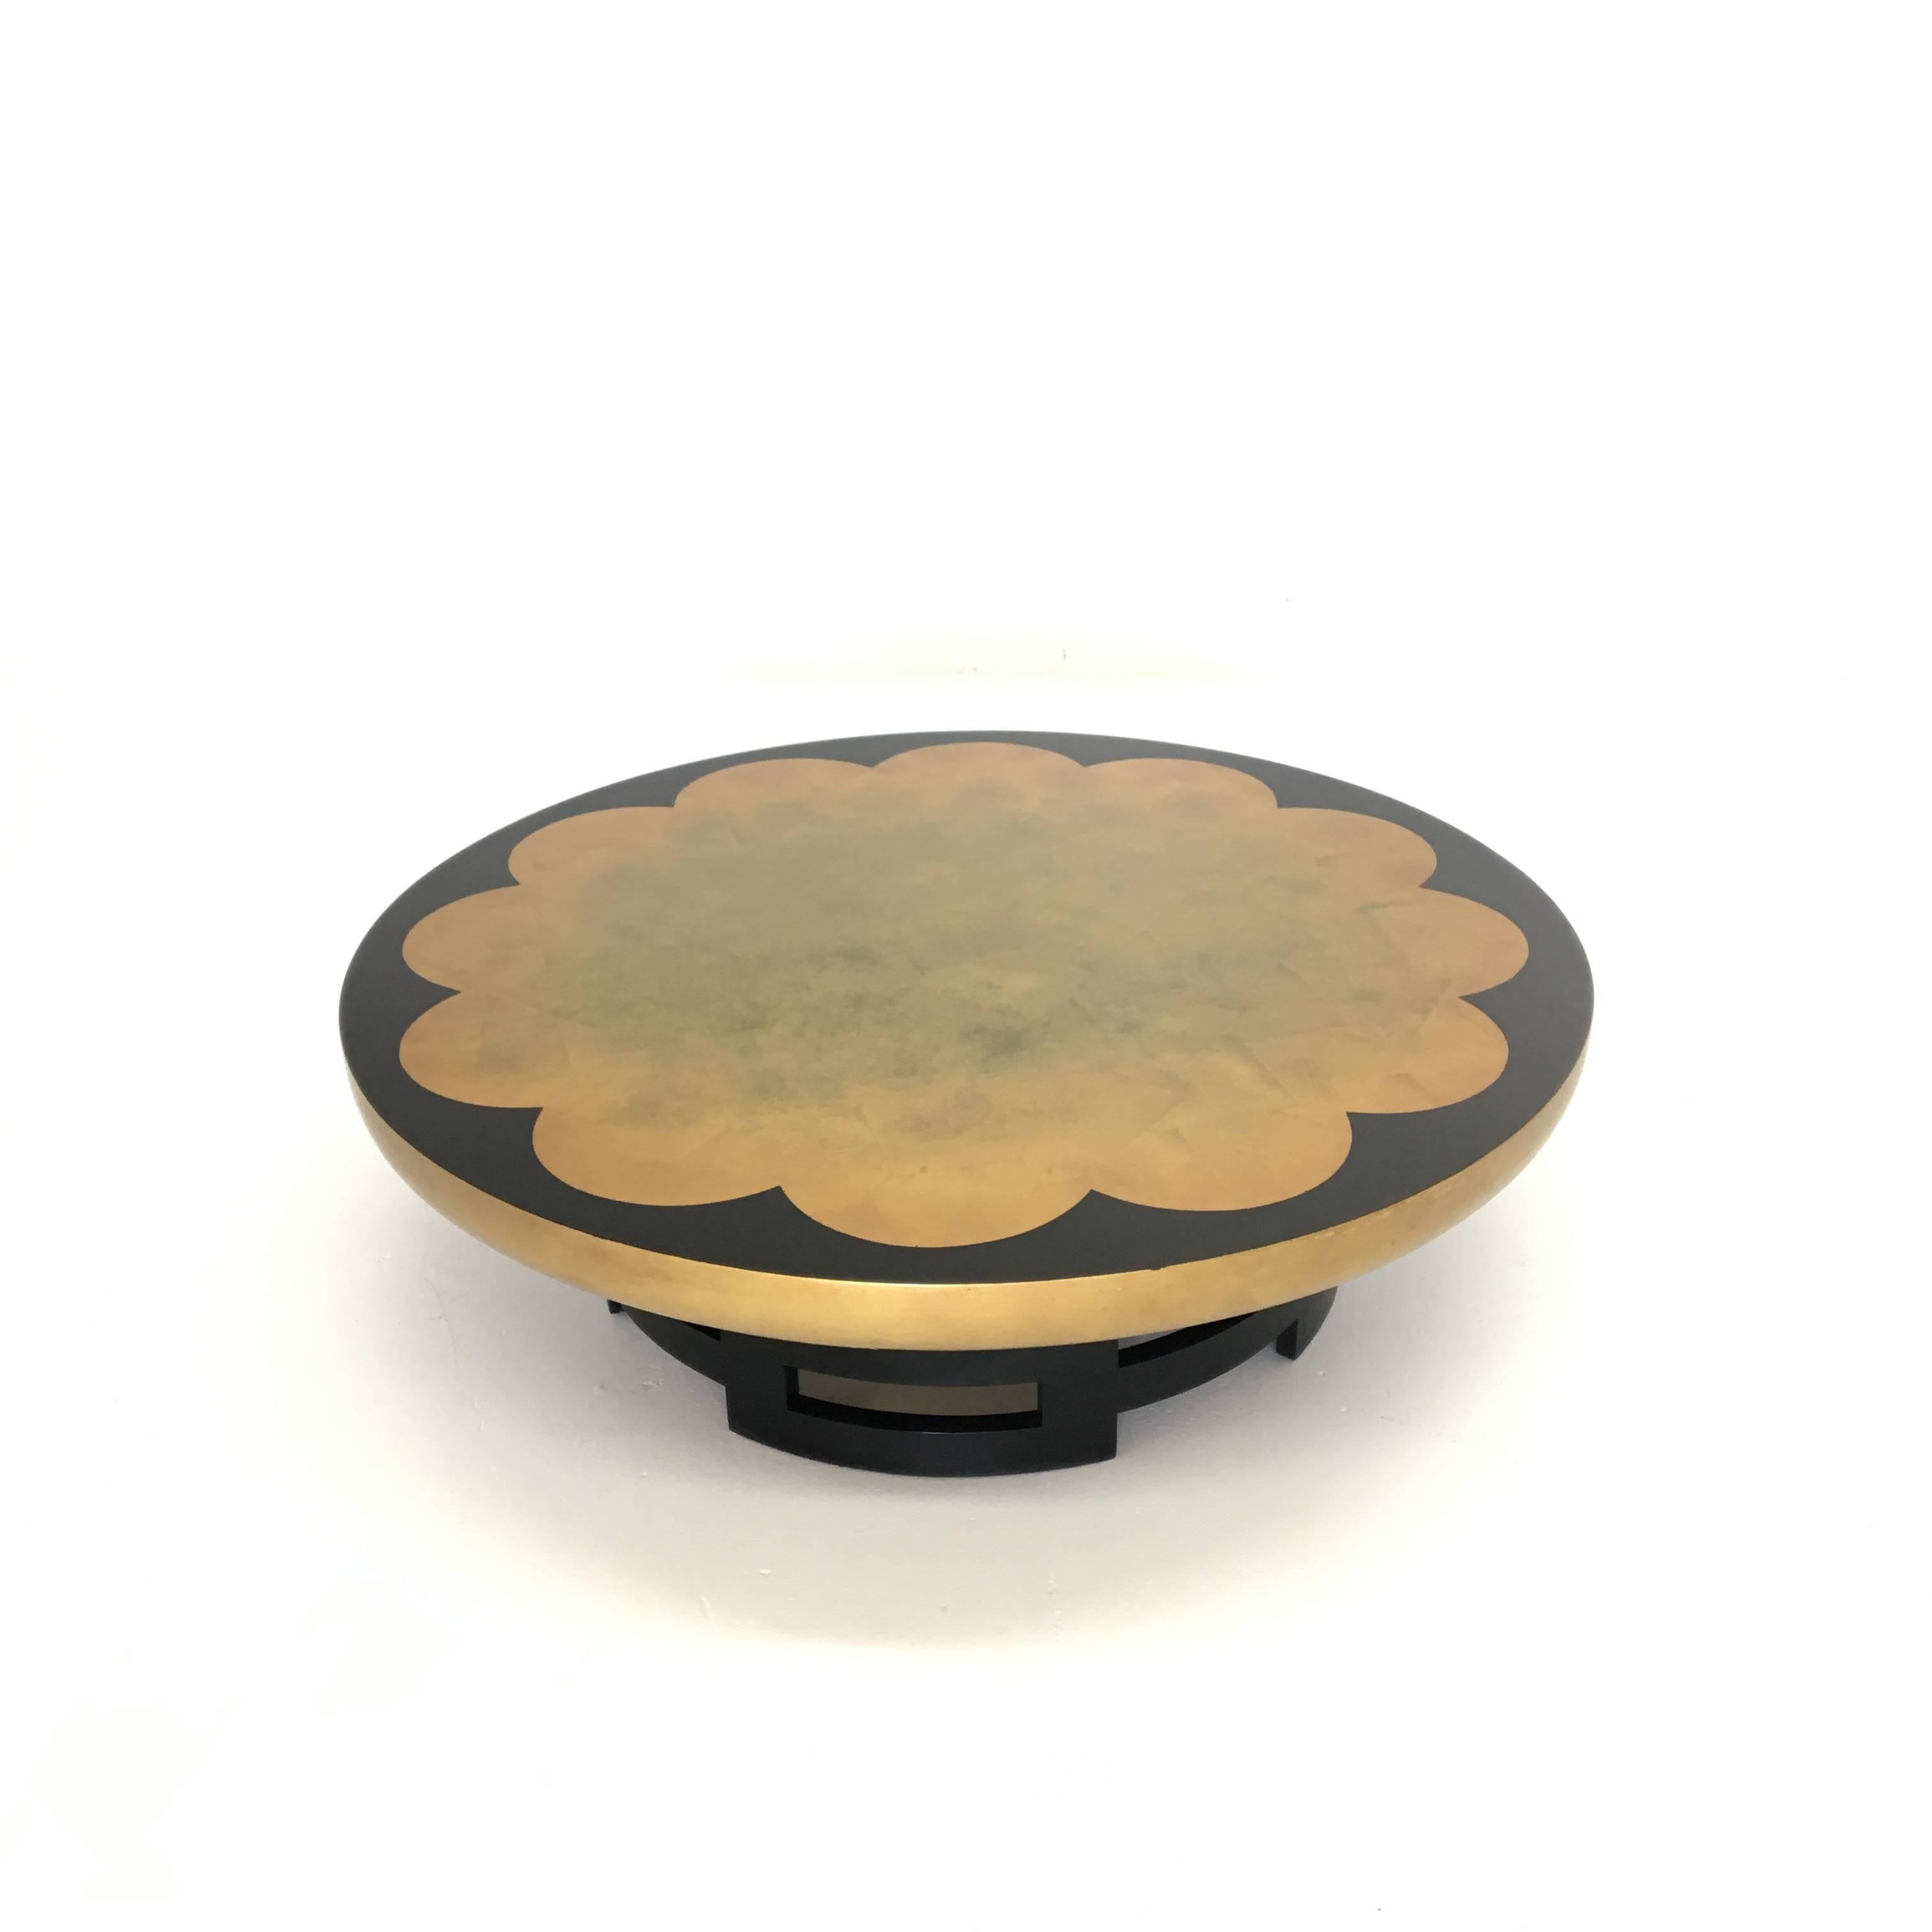 Mid-Century Modern Asian inspired lotus coffee table in the gold leaf finish designed by Theodore Muller and Isabel Barringer for Kittinger. This comes with a circular glass which covers the top surface protecting the finish. Age appropriate wear.